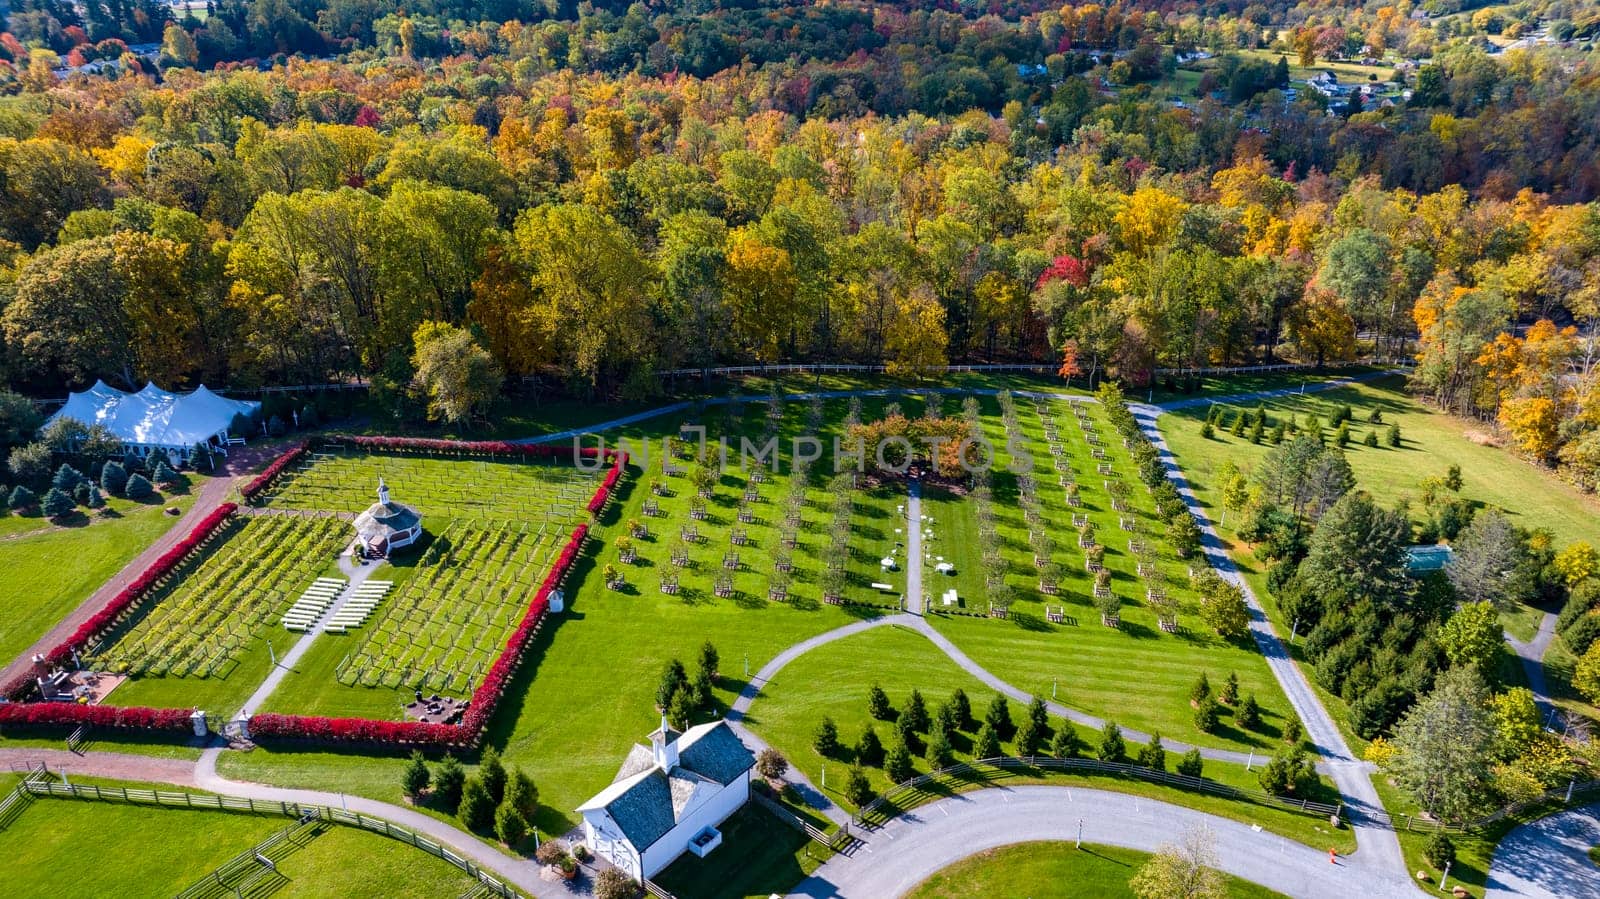 Elizabethtown, Pennsylvania, October 22, 2023 - An Aerial View of a Gazebo, Vineyard and Orchard, in Autumn With Fall Colors